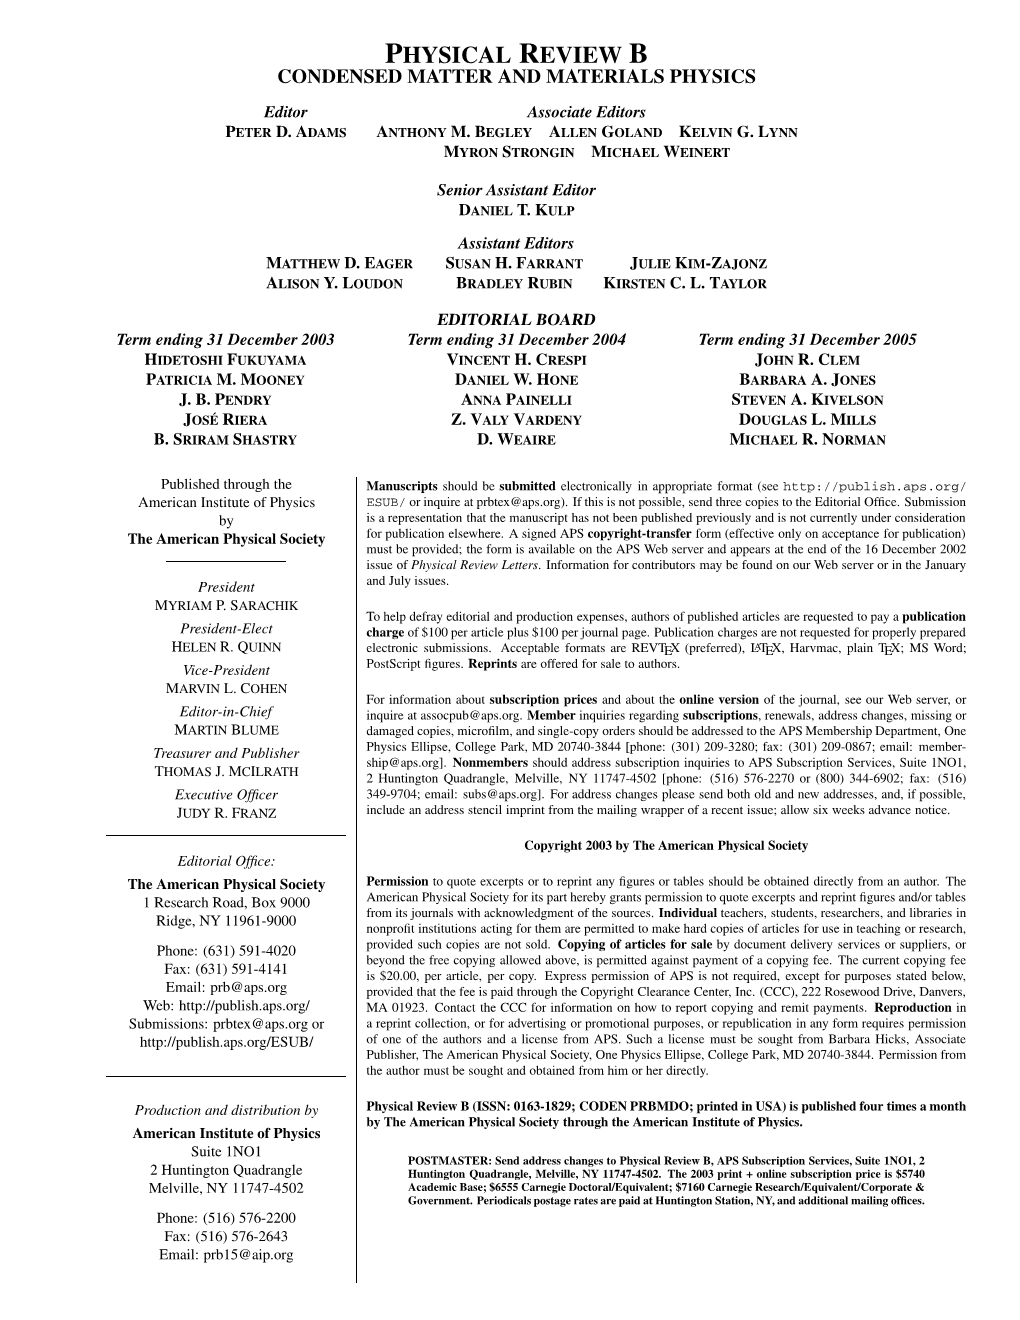 Physical Review B Condensed Matter and Materials Physics